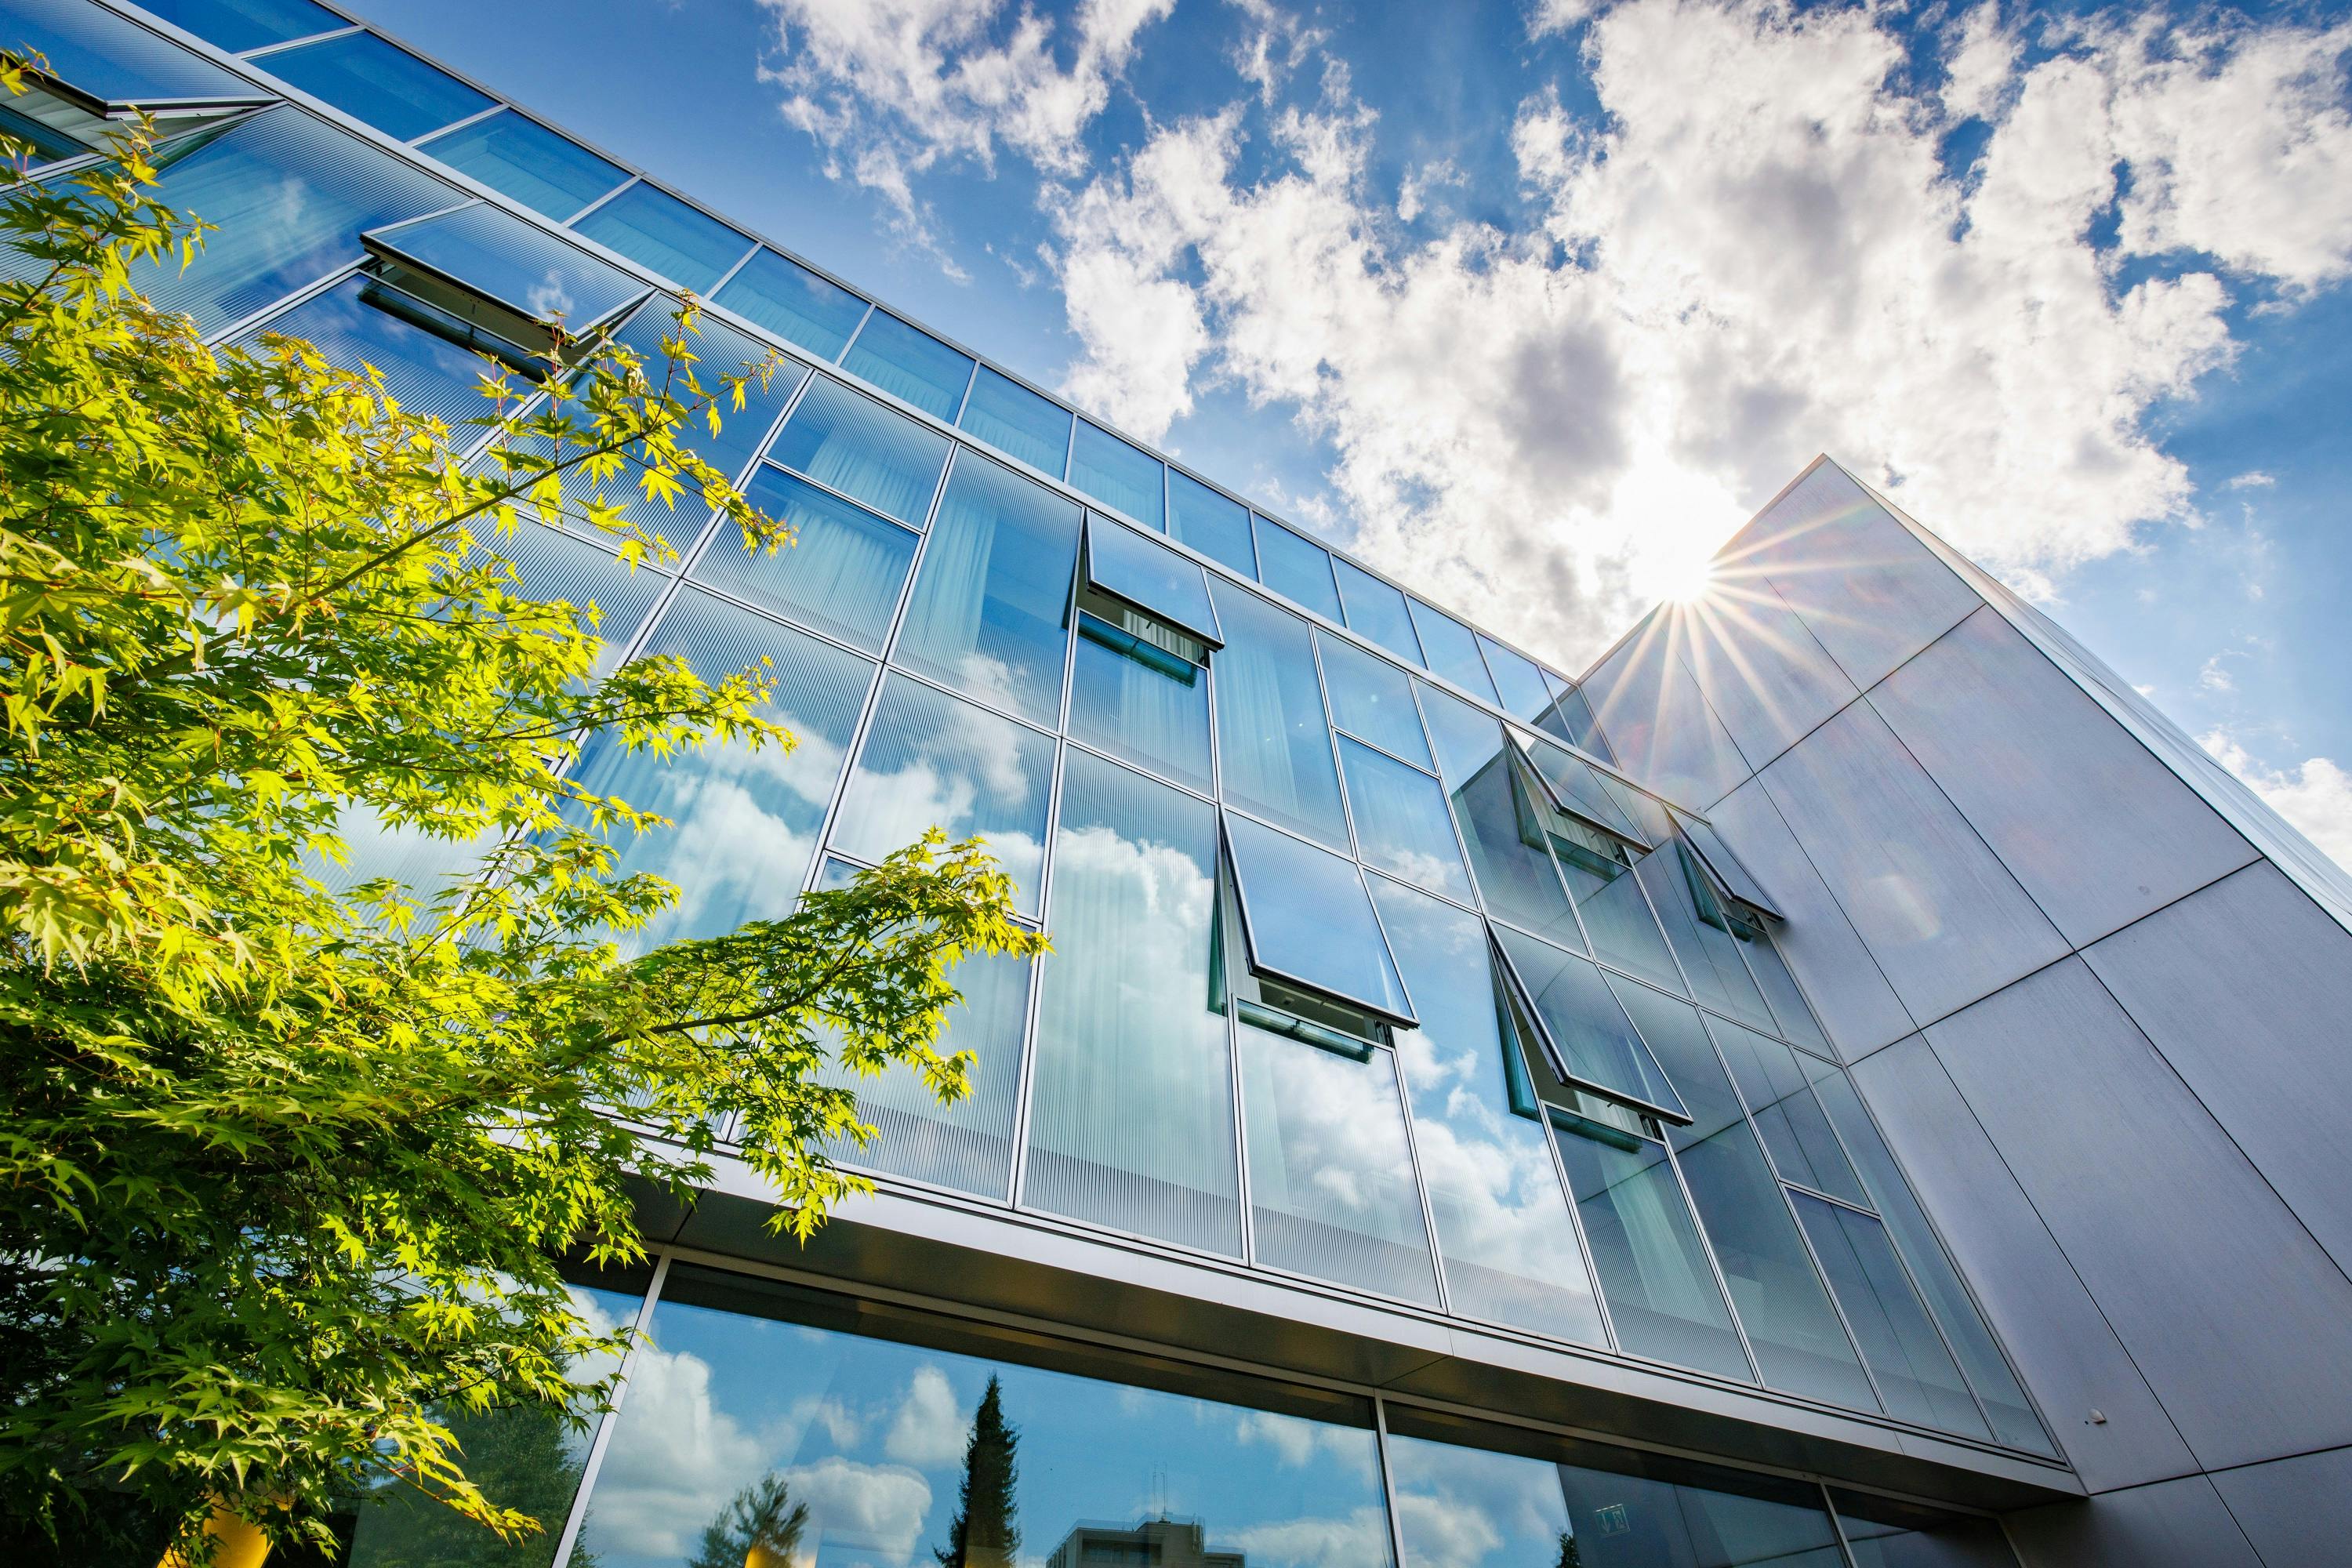 Modern glass façade of a building with open windows and sunbeams, surrounded by blue sky and green branches.